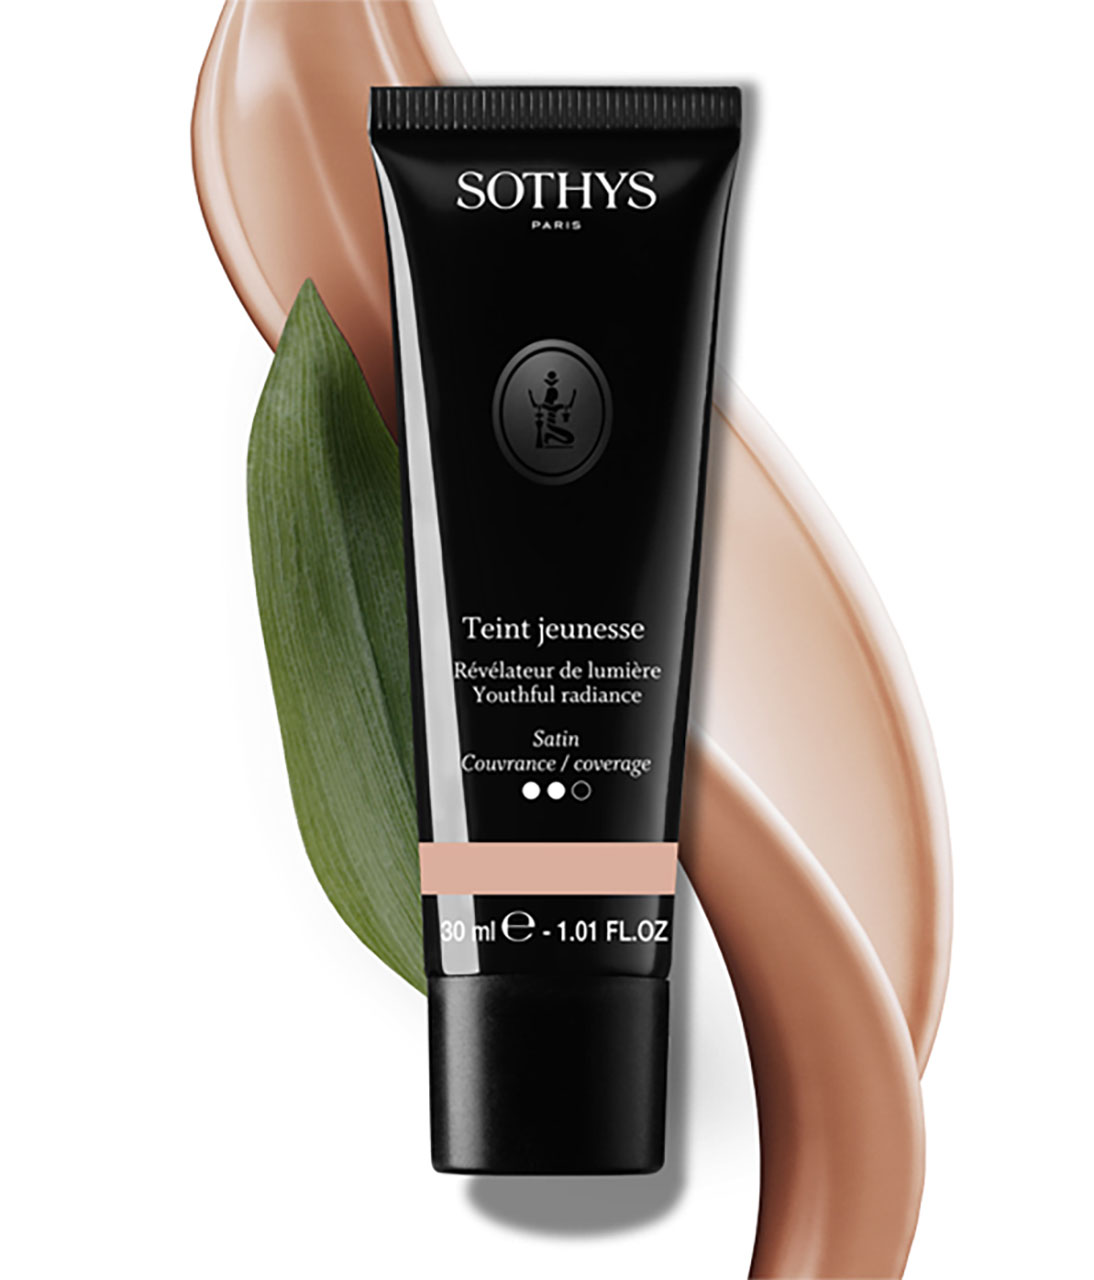 Sothys Teint Jeunesse Youthful Radiance Foundation - 1.01 oz Questions & Answers